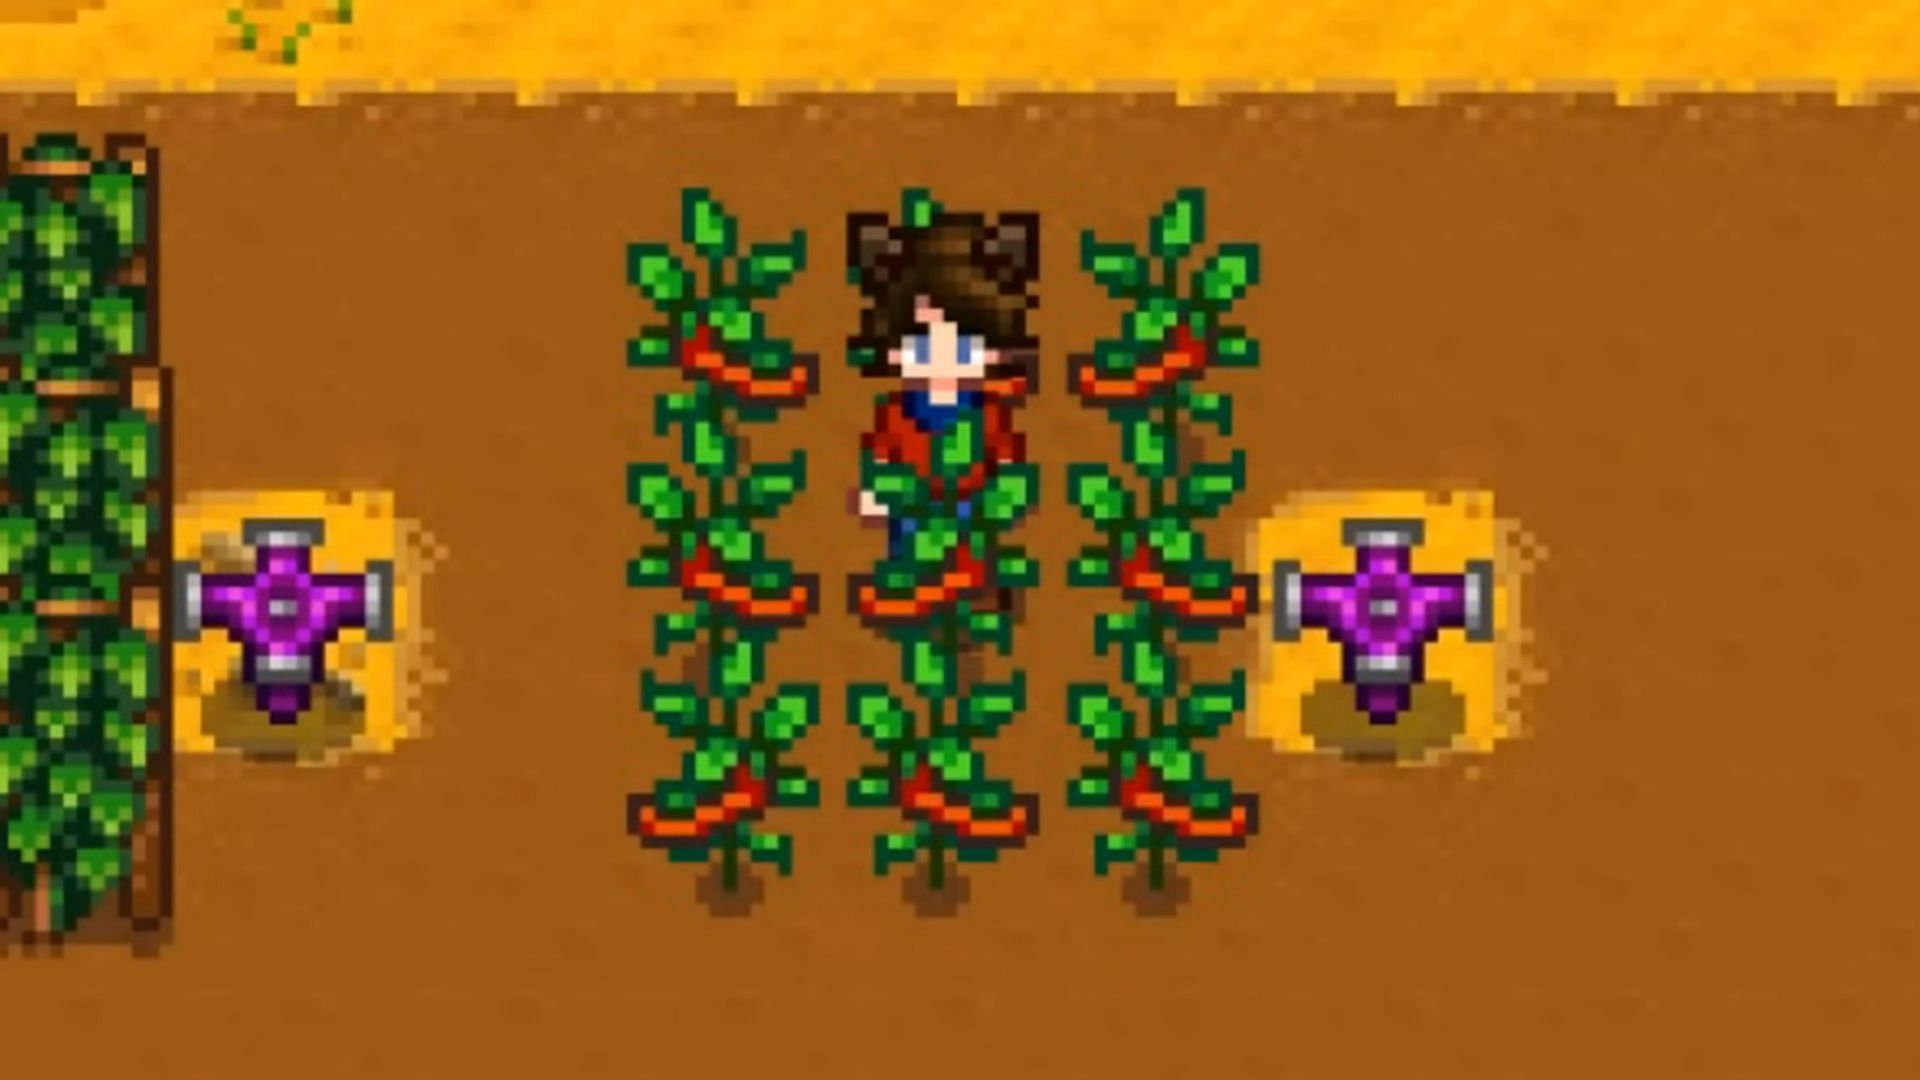 Hot Pepper crops in Stardew Valley (Image via ConcernedApe || YouTube: @Salmence)